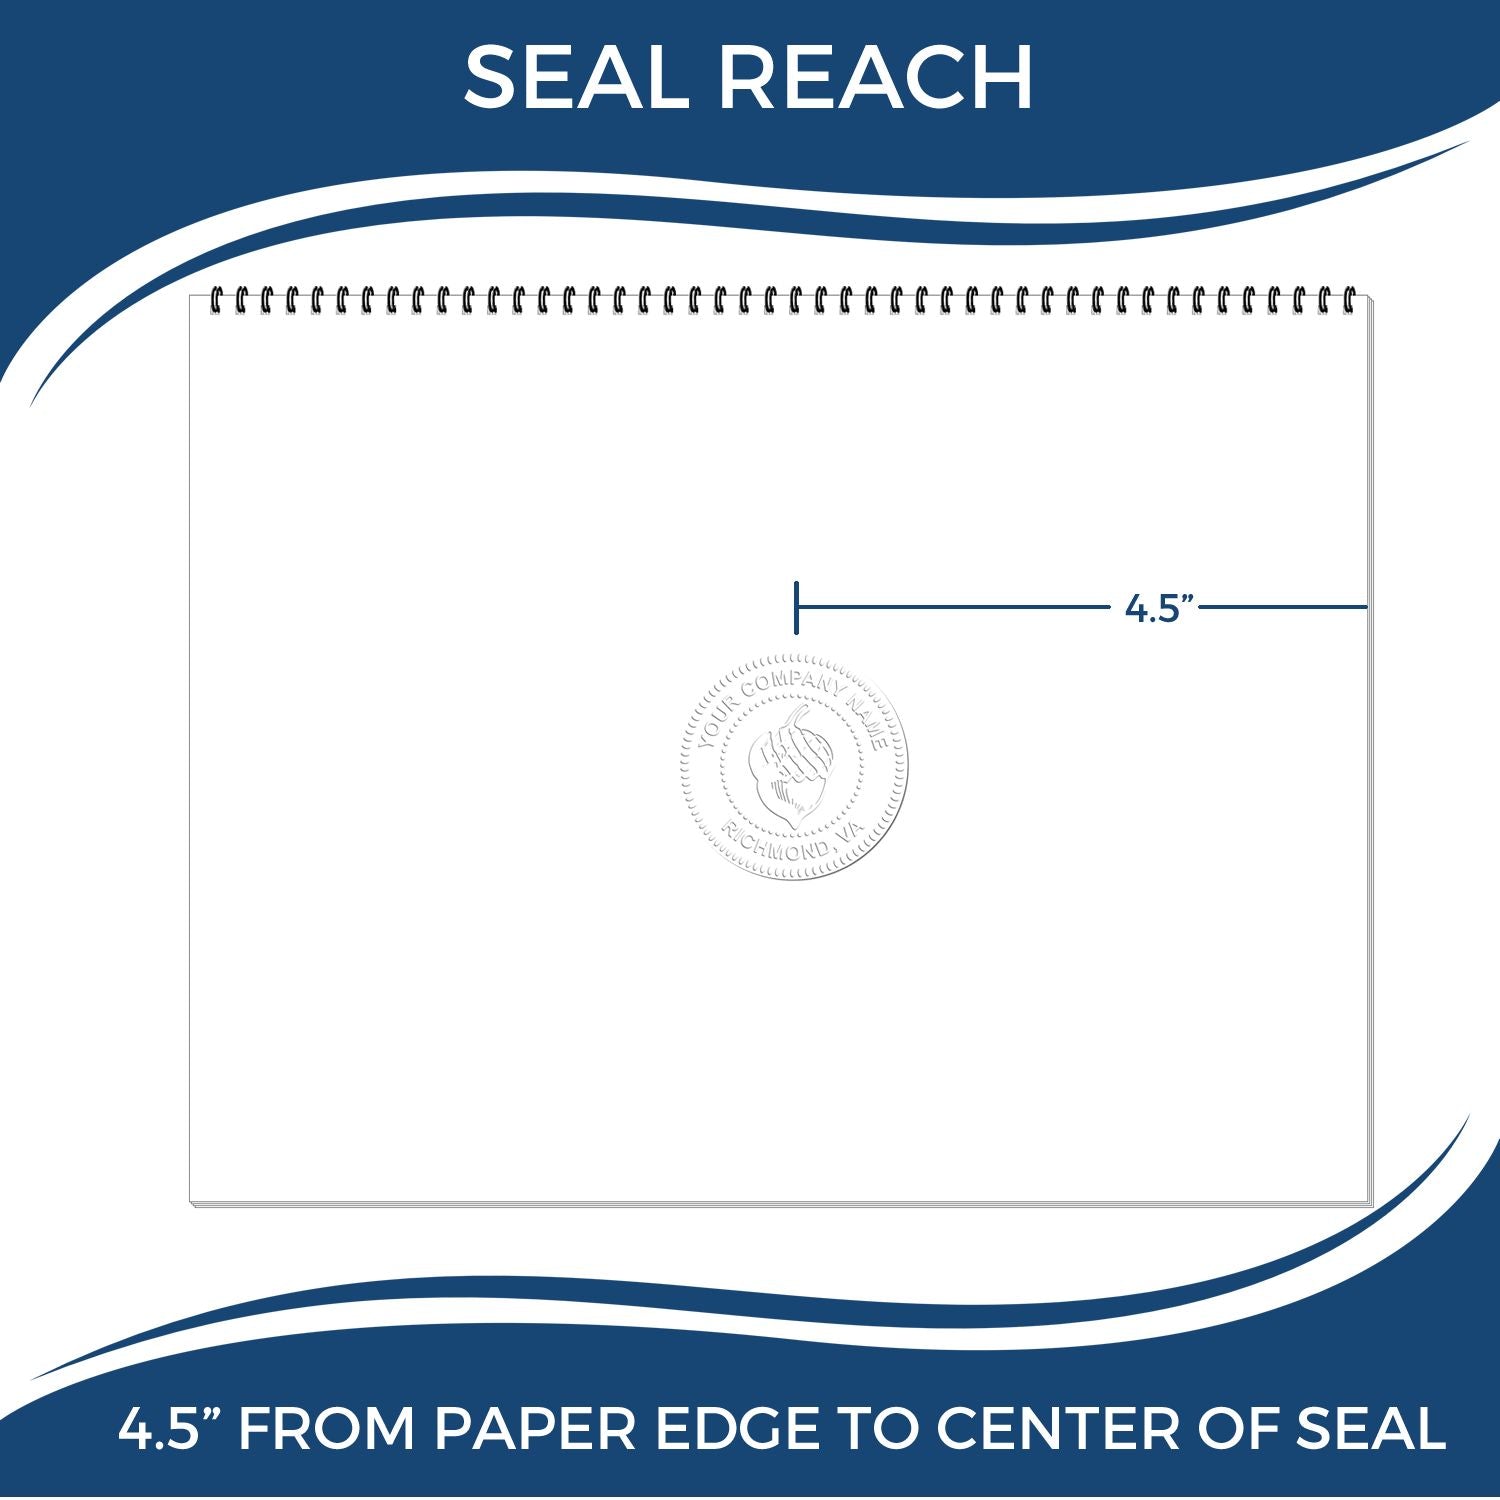 An infographic showing the seal reach which is represented by a ruler and a miniature seal image of the Extended Long Reach New Mexico Surveyor Embosser